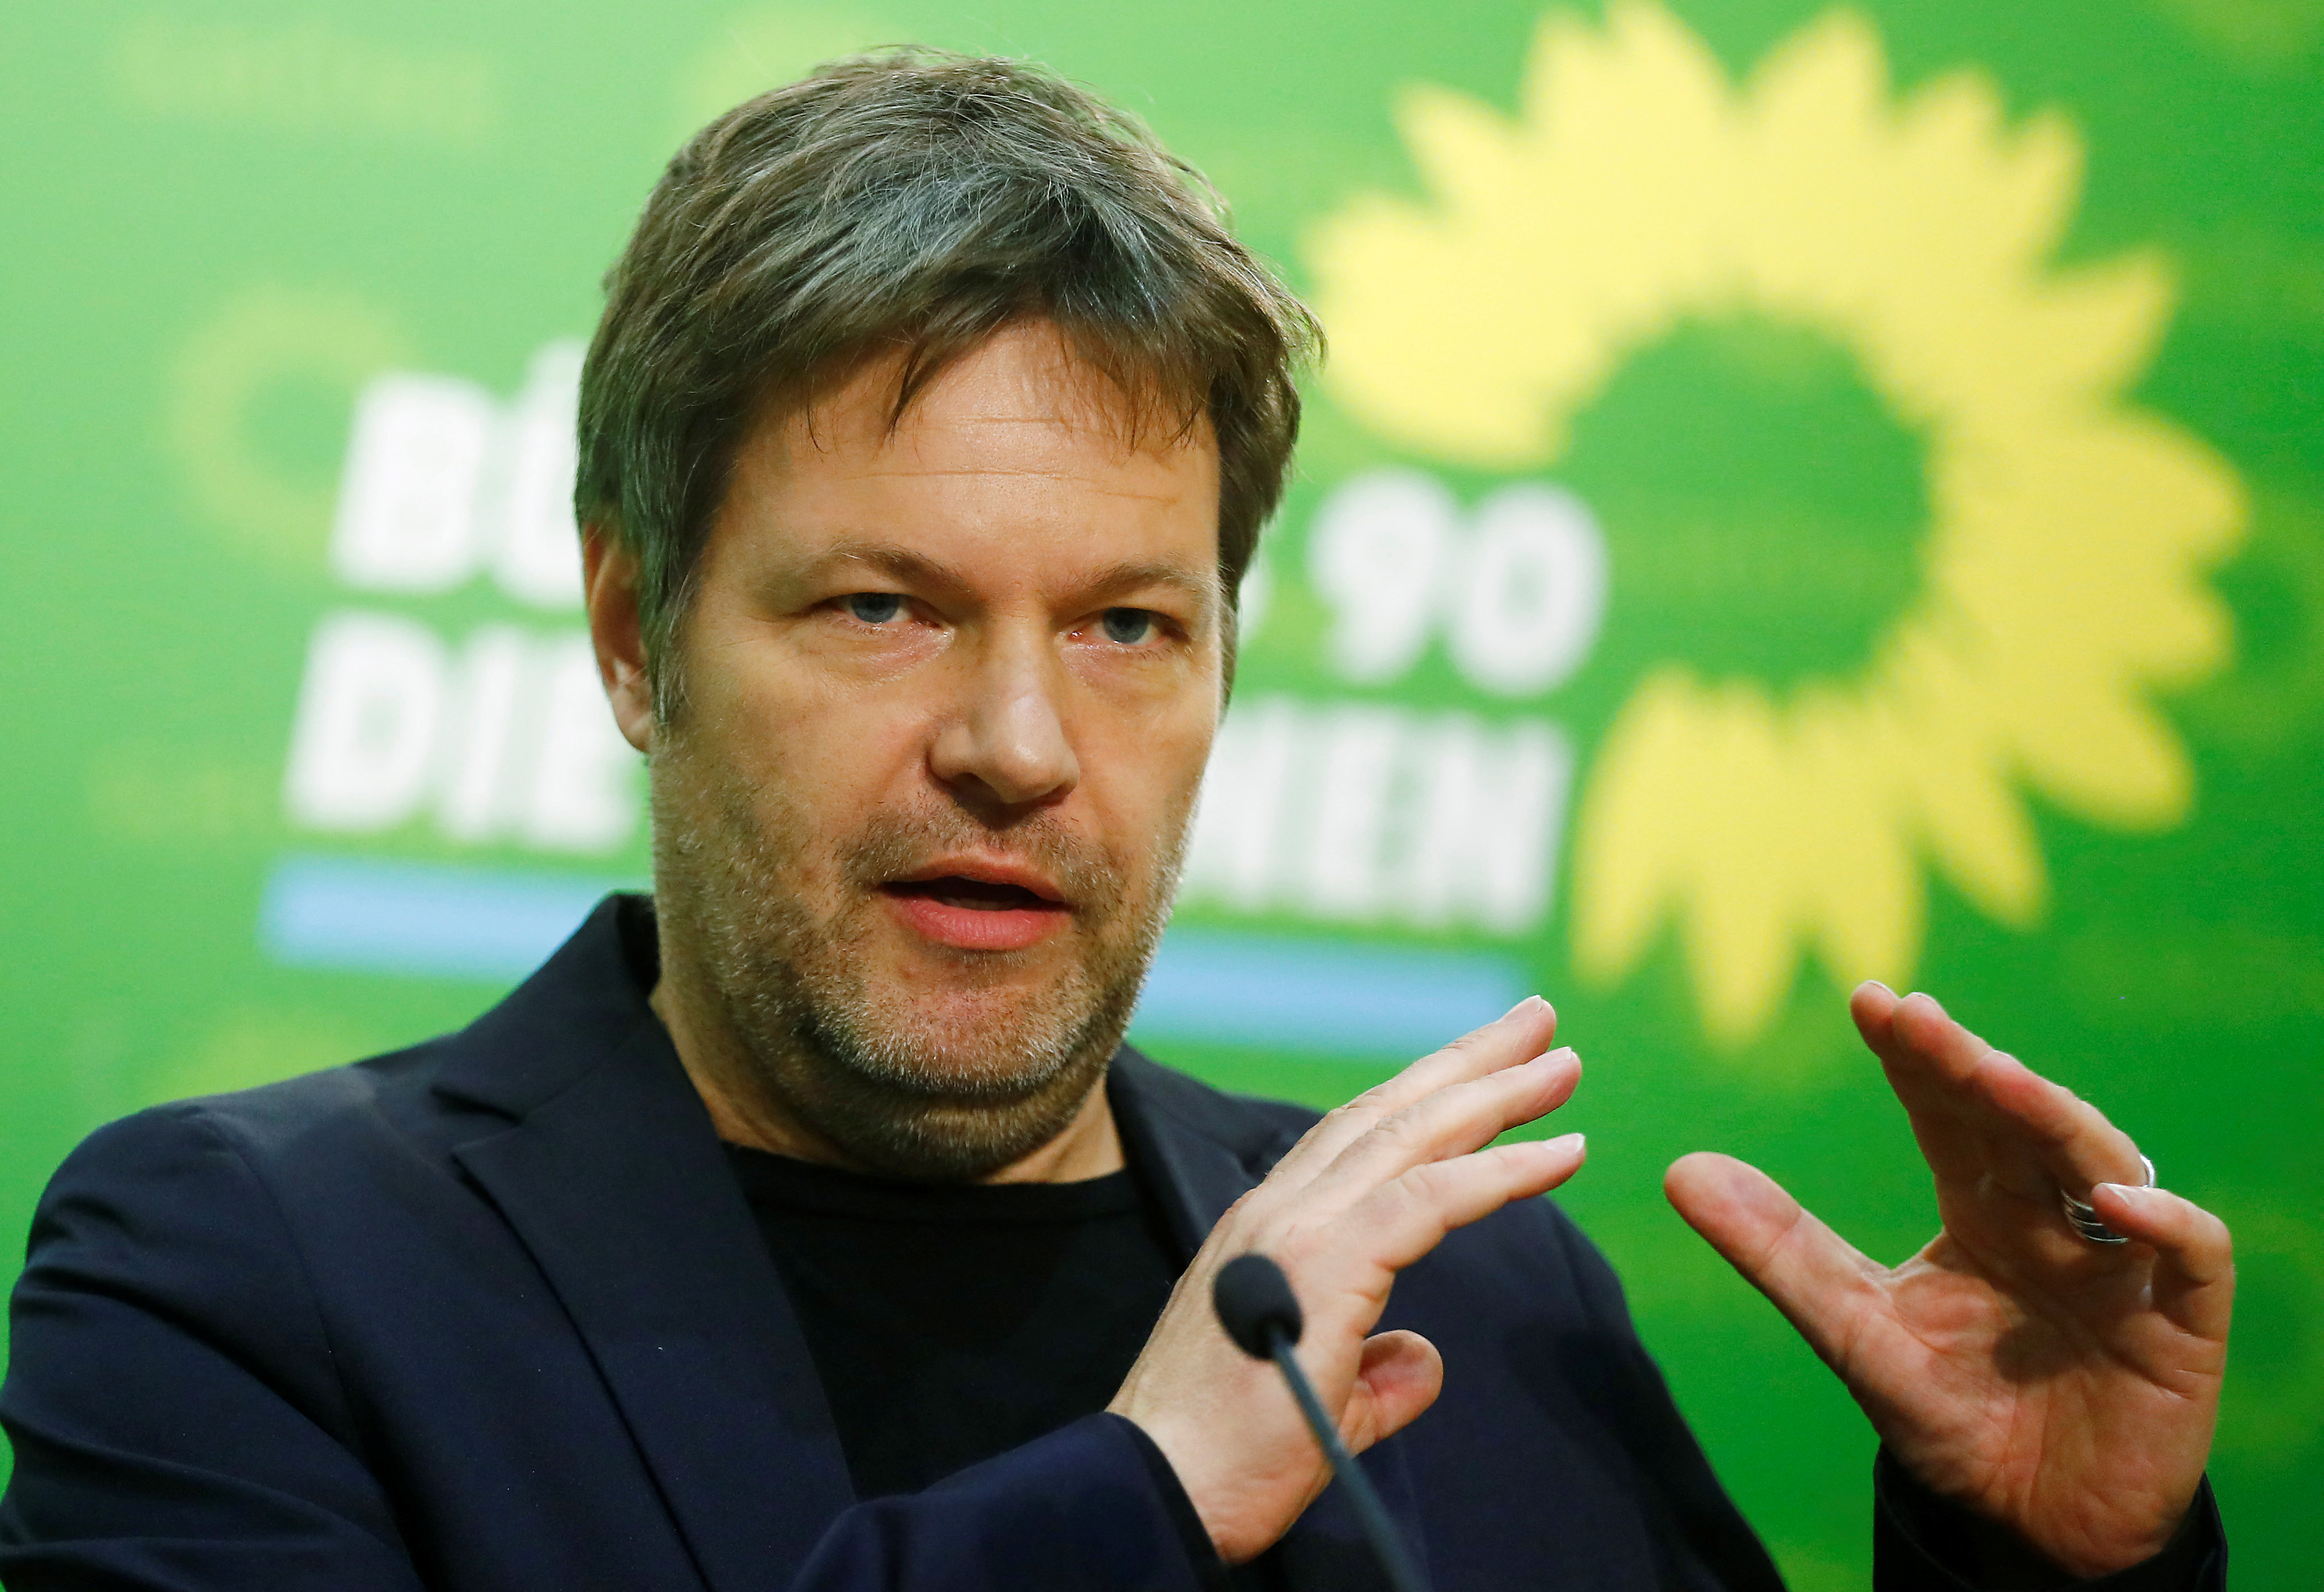 New leader of the German Green party, Habeck, attends a news conference at the party headquarters in Berlin